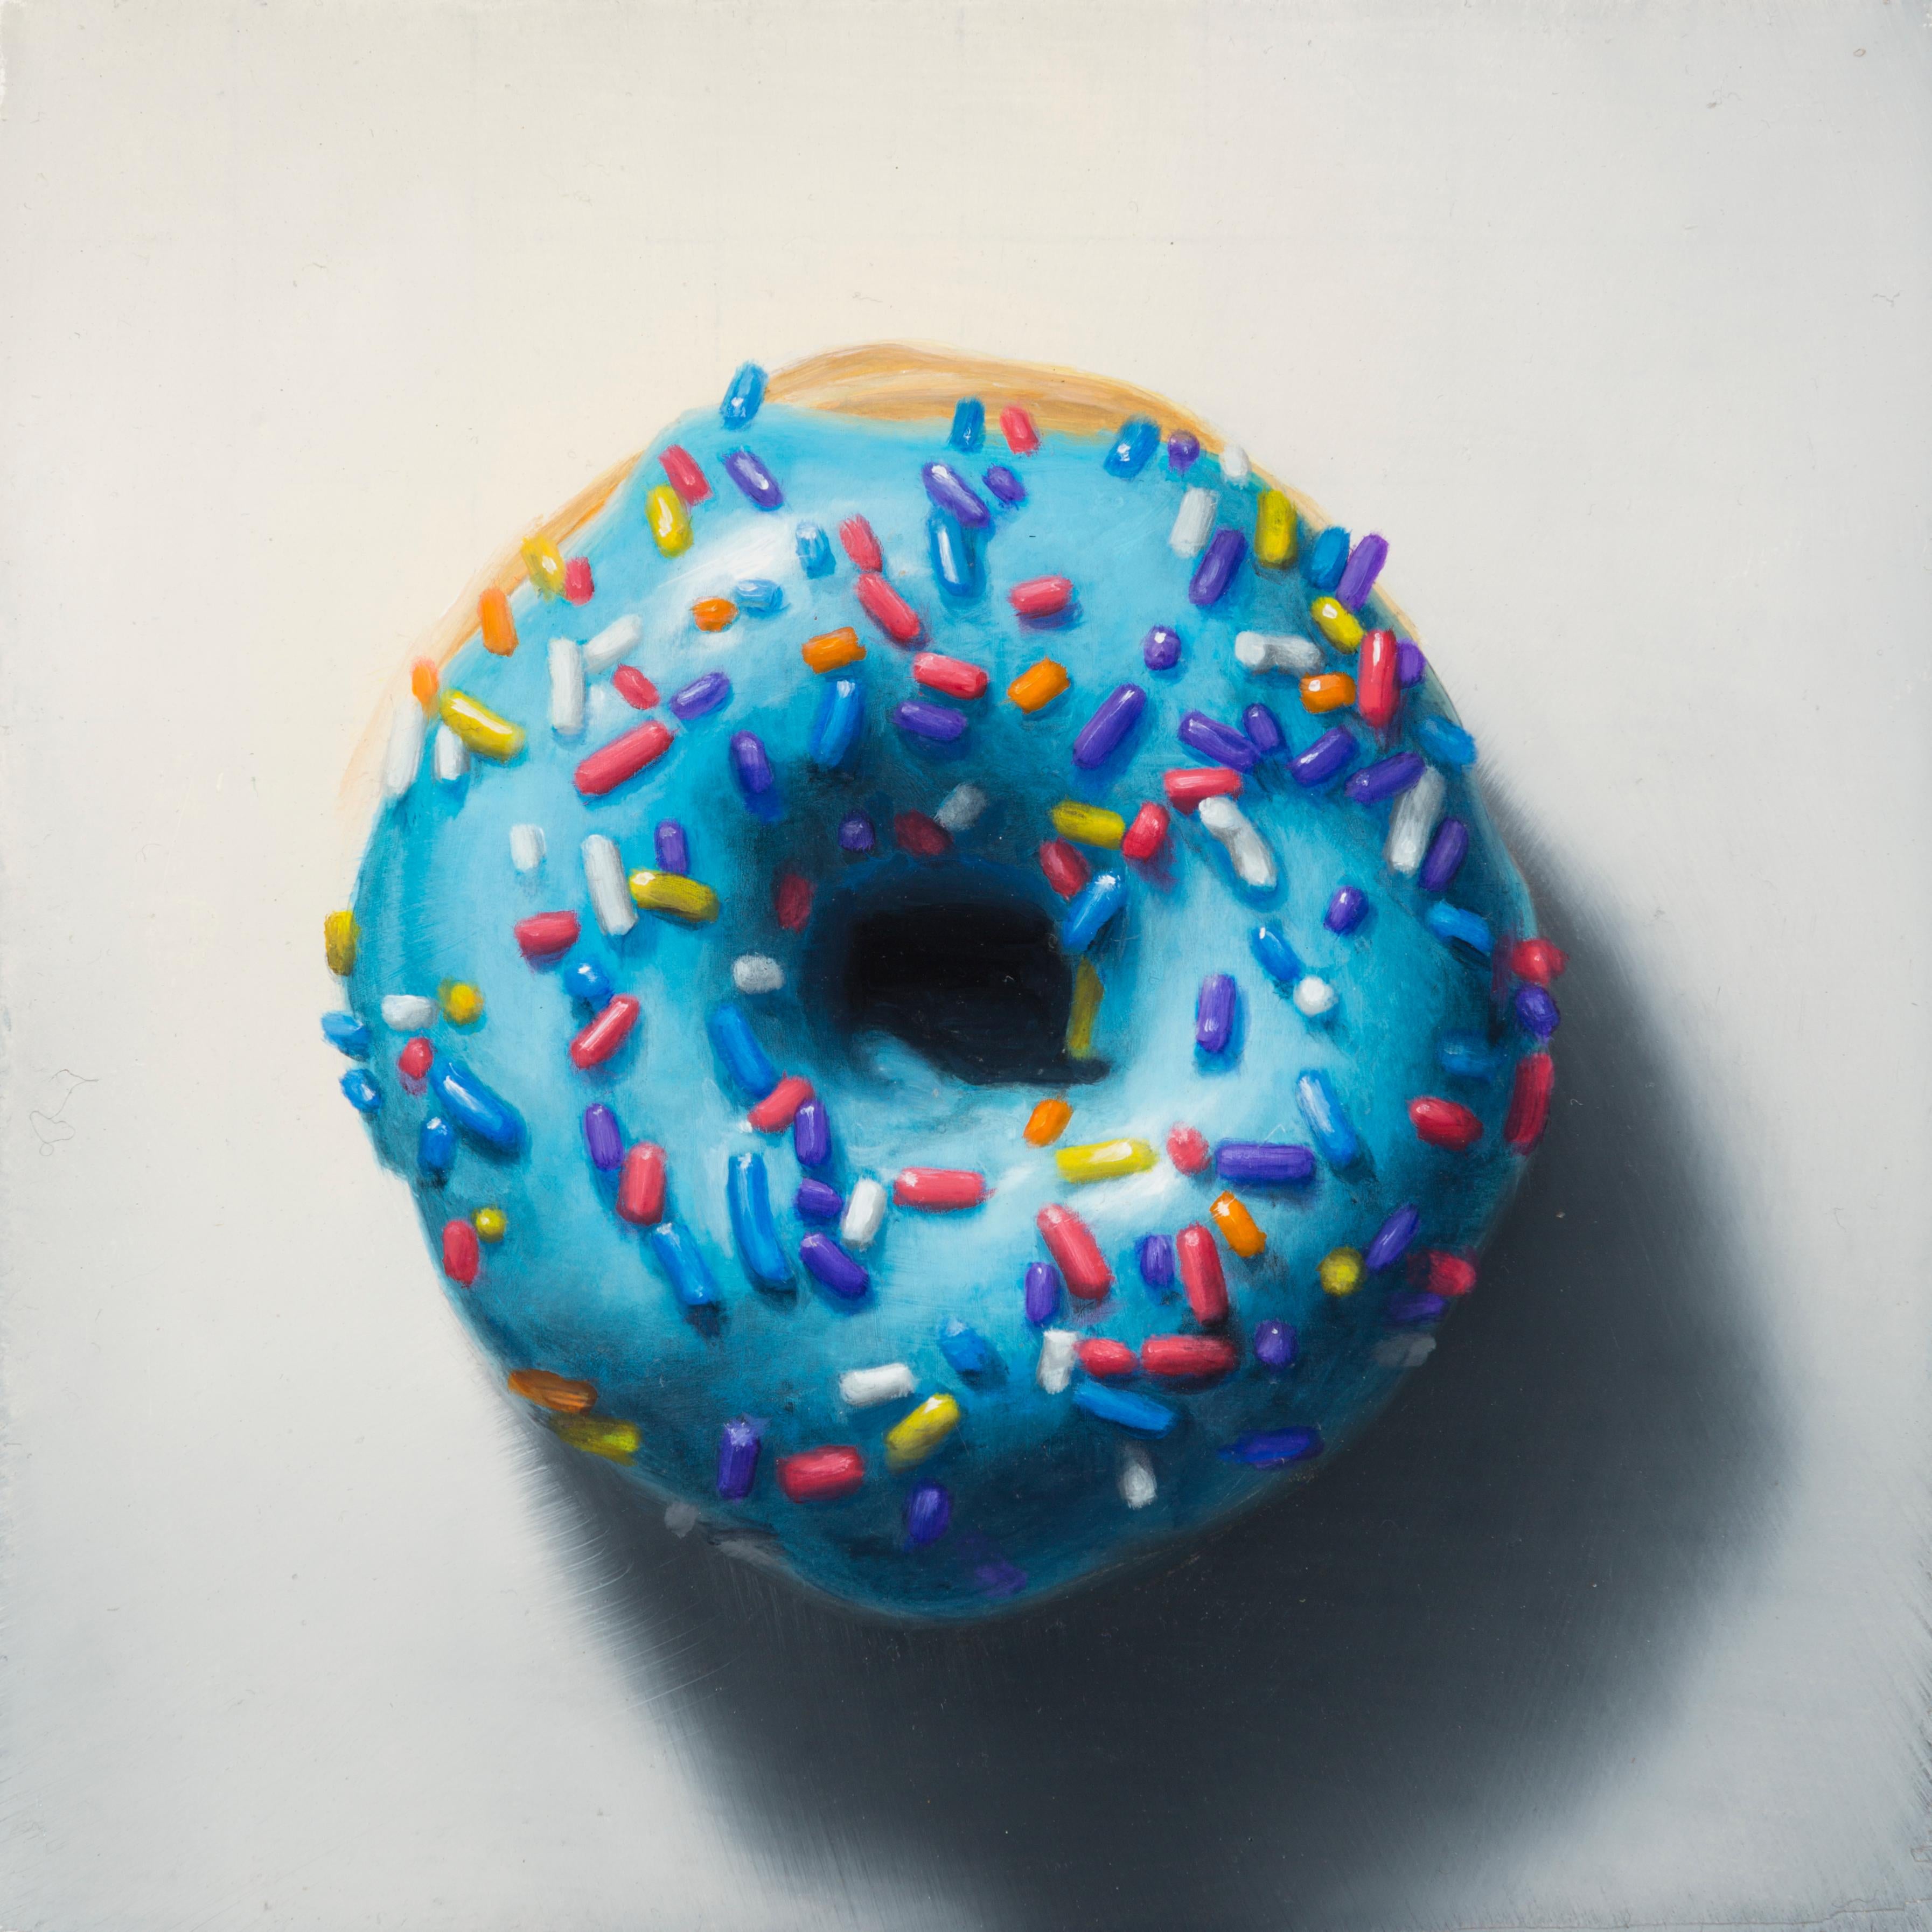 Gregory Block Still-Life Painting - "Blue Sprinkle" Oil Painting